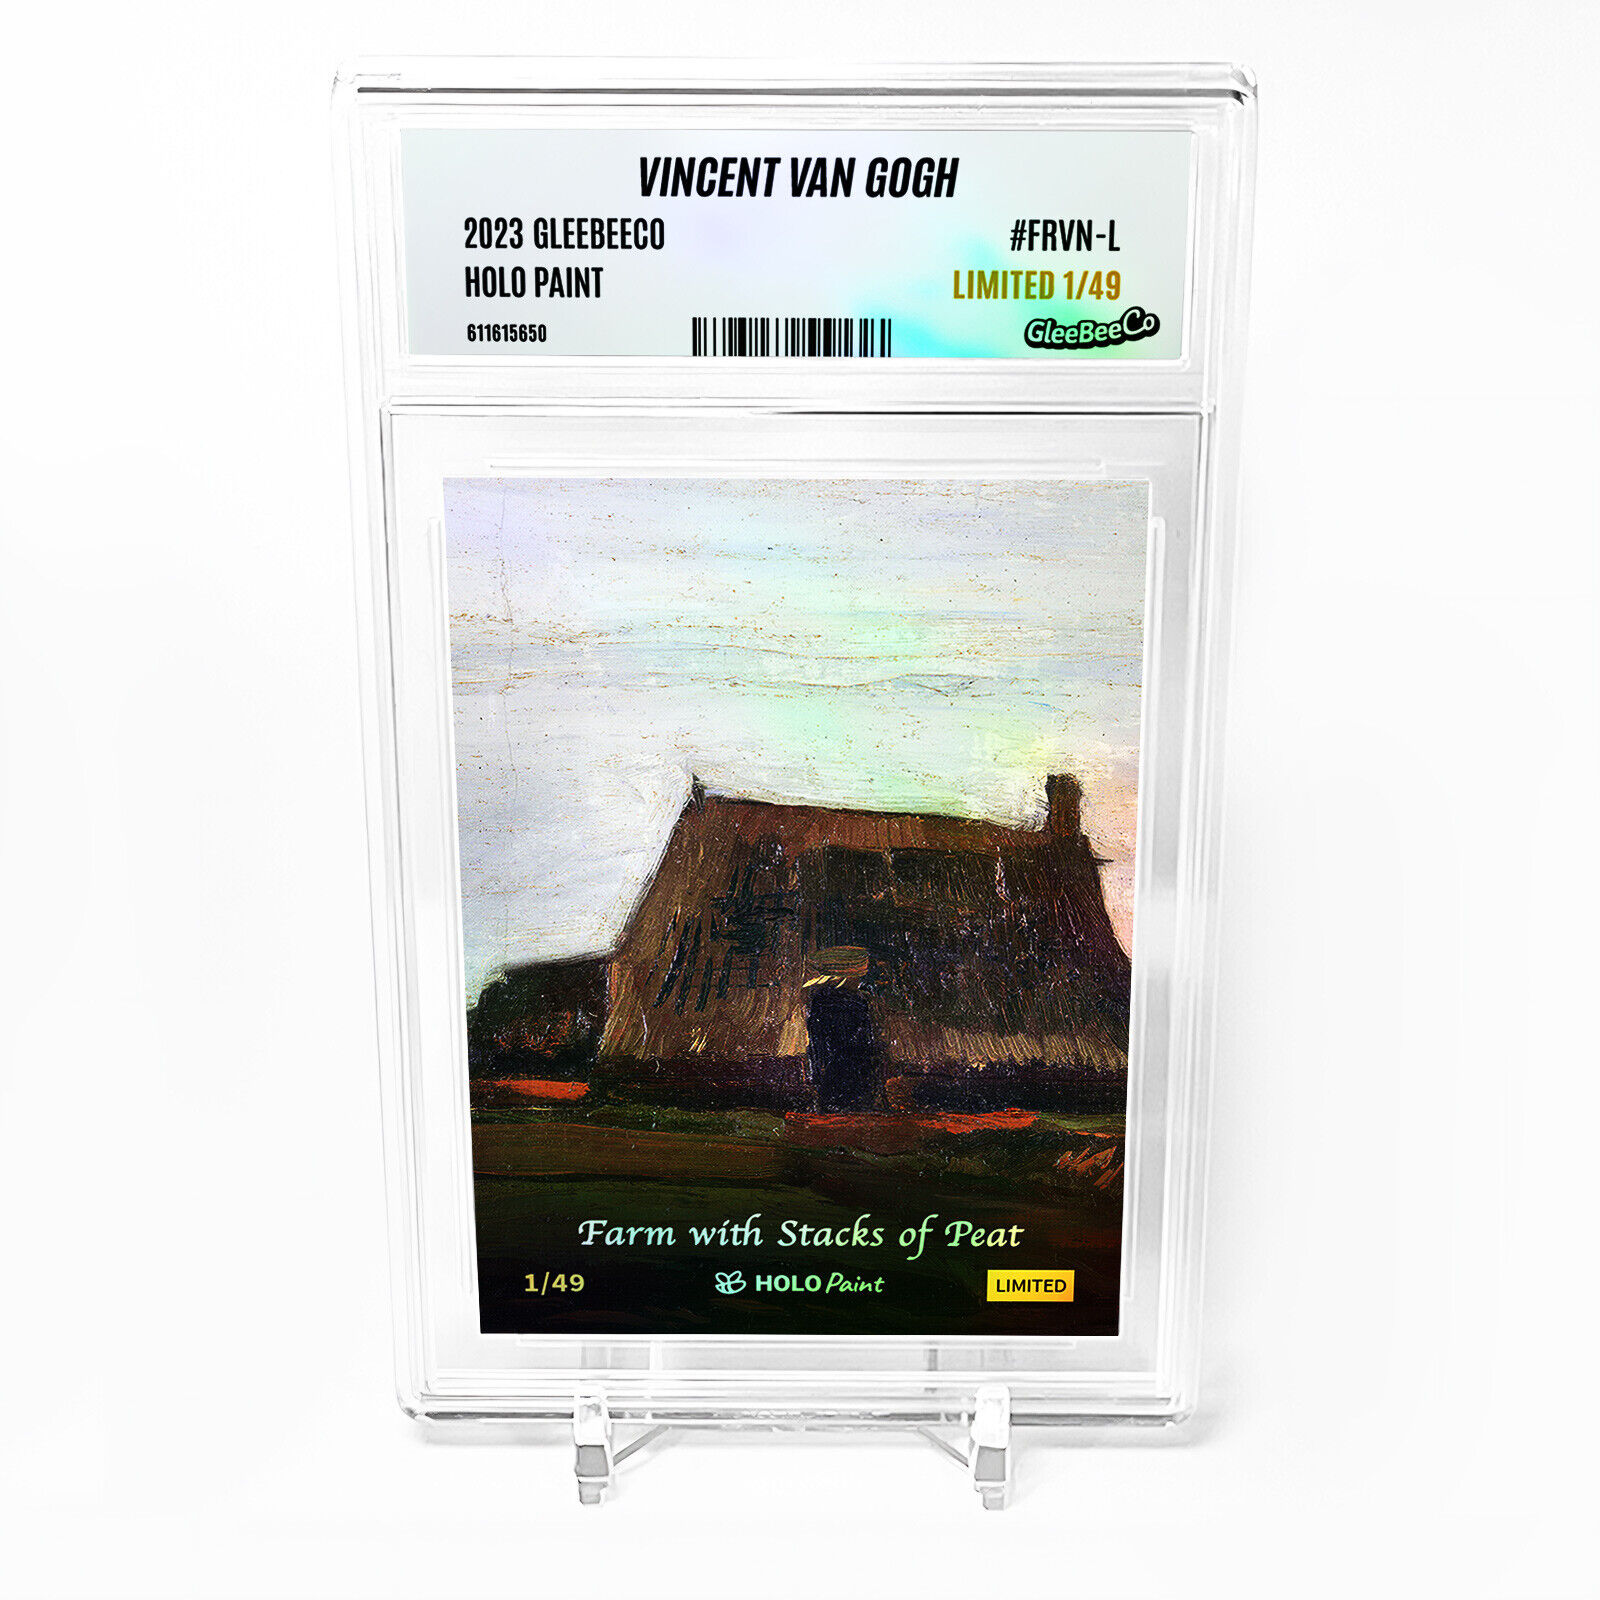 FARM WITH STACKS OF PEAT Vincent van Gogh 2023 GleeBeeCo Holo Card #FRVN-L /49